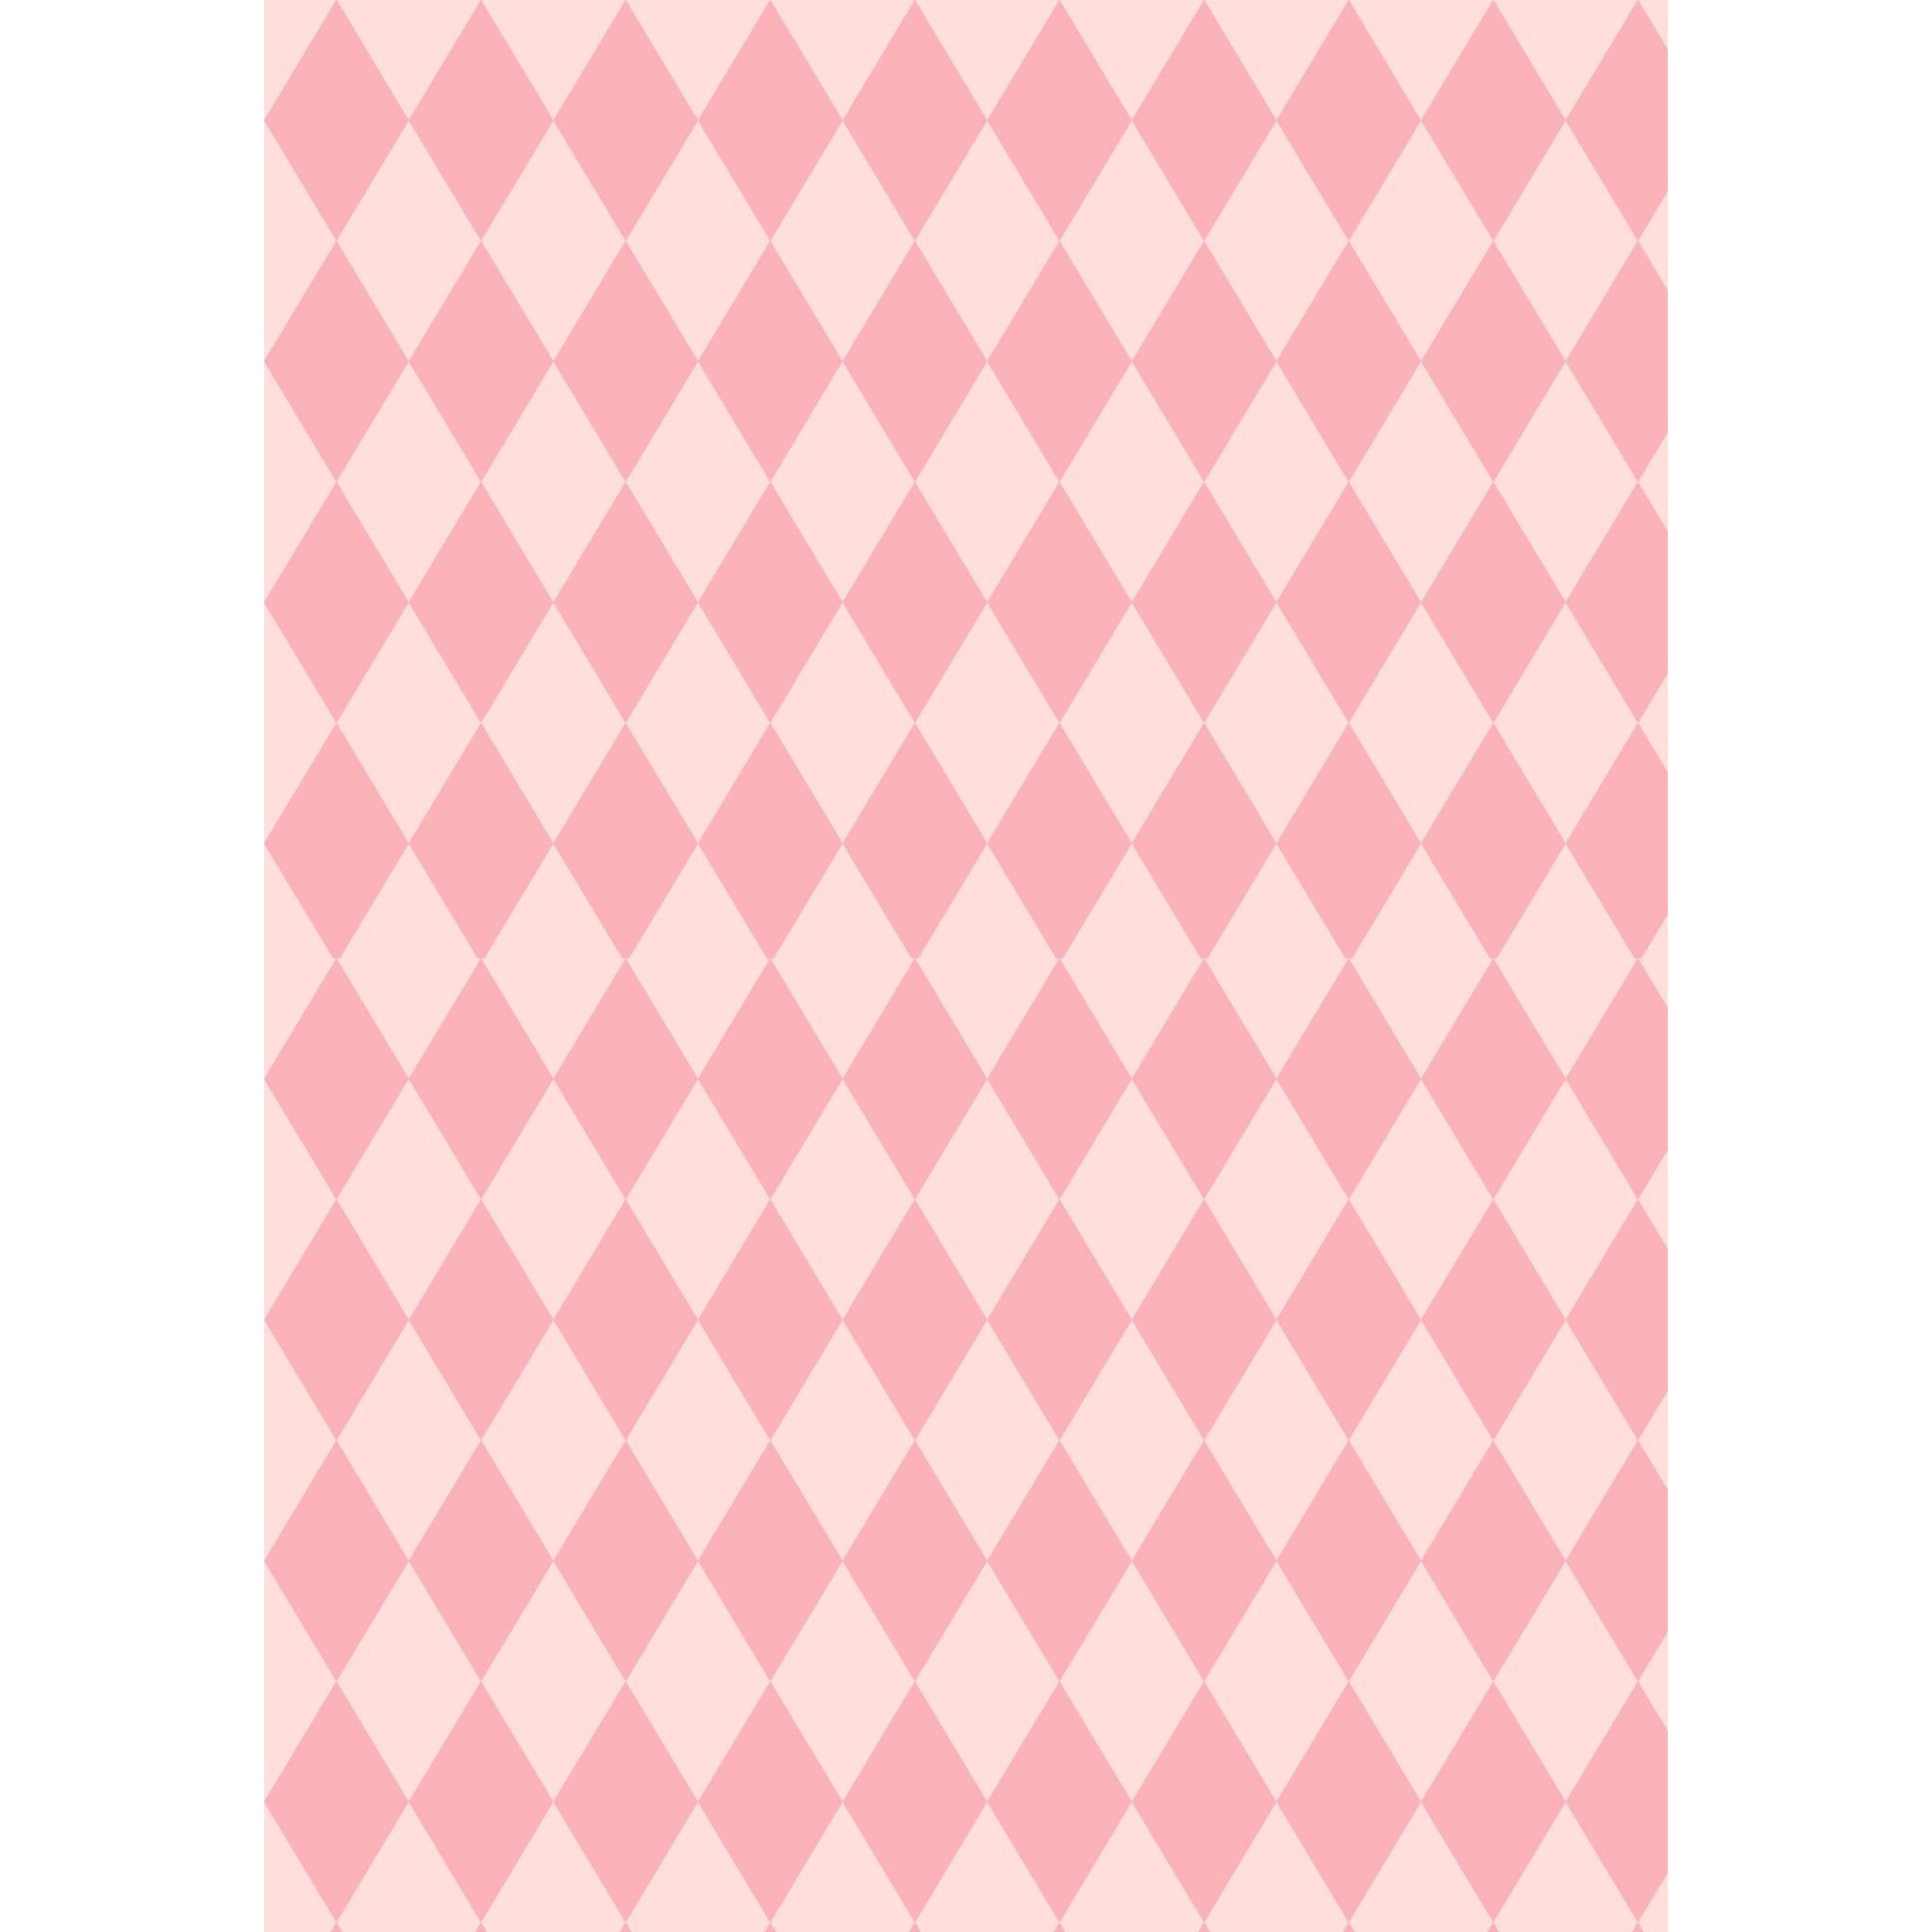 Tissue paper design featuring a playful pink harlequin diamond pattern. White borders are on the sides.